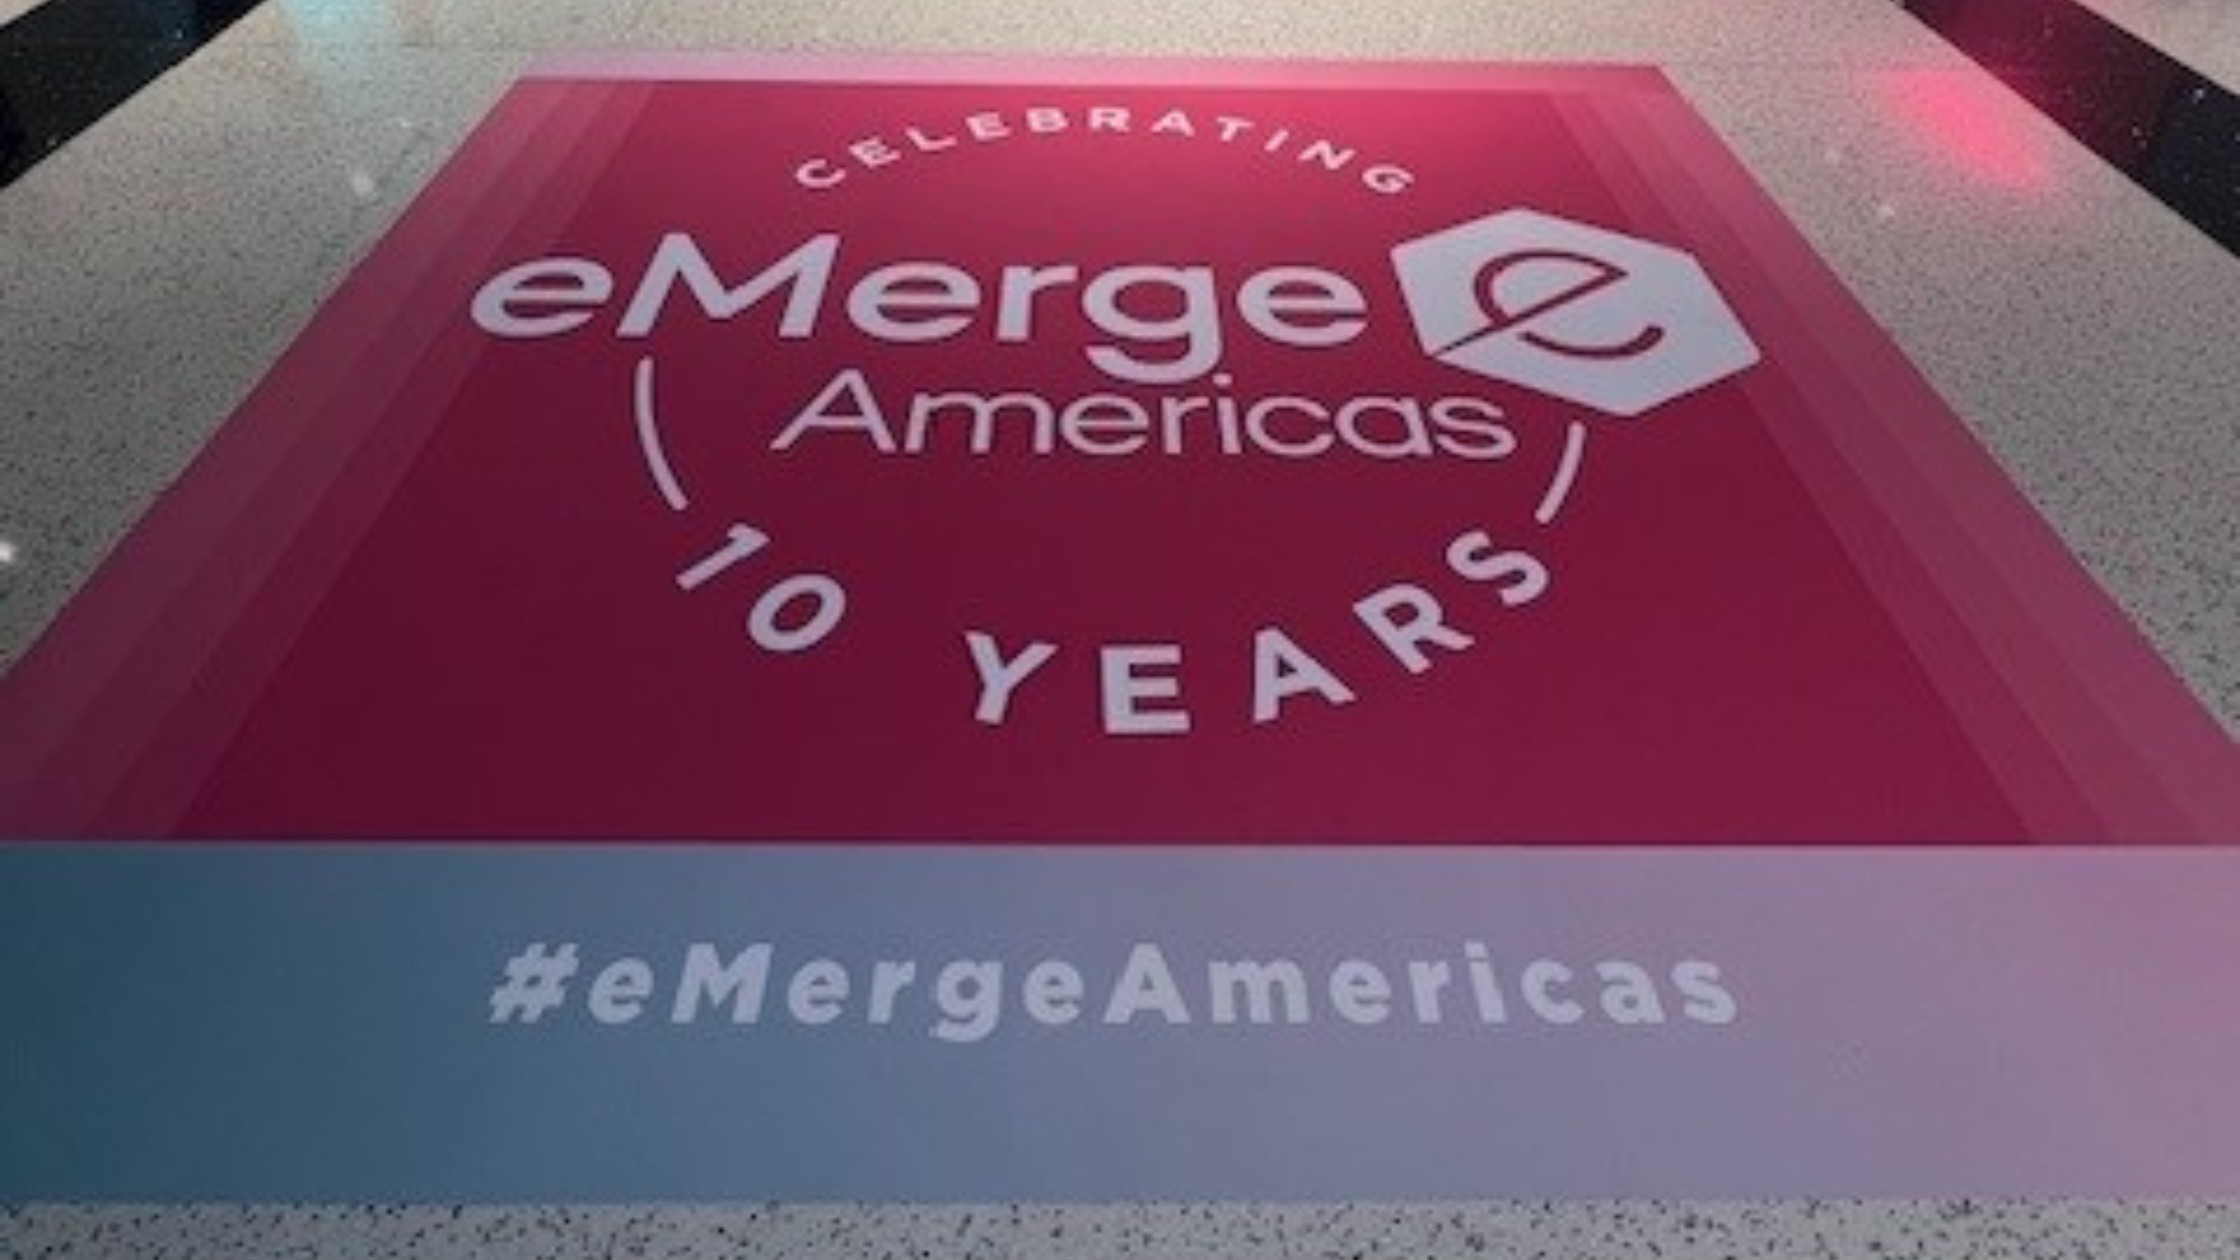 Insights from eMerge America: The Next Decade According to Peter Diamandis